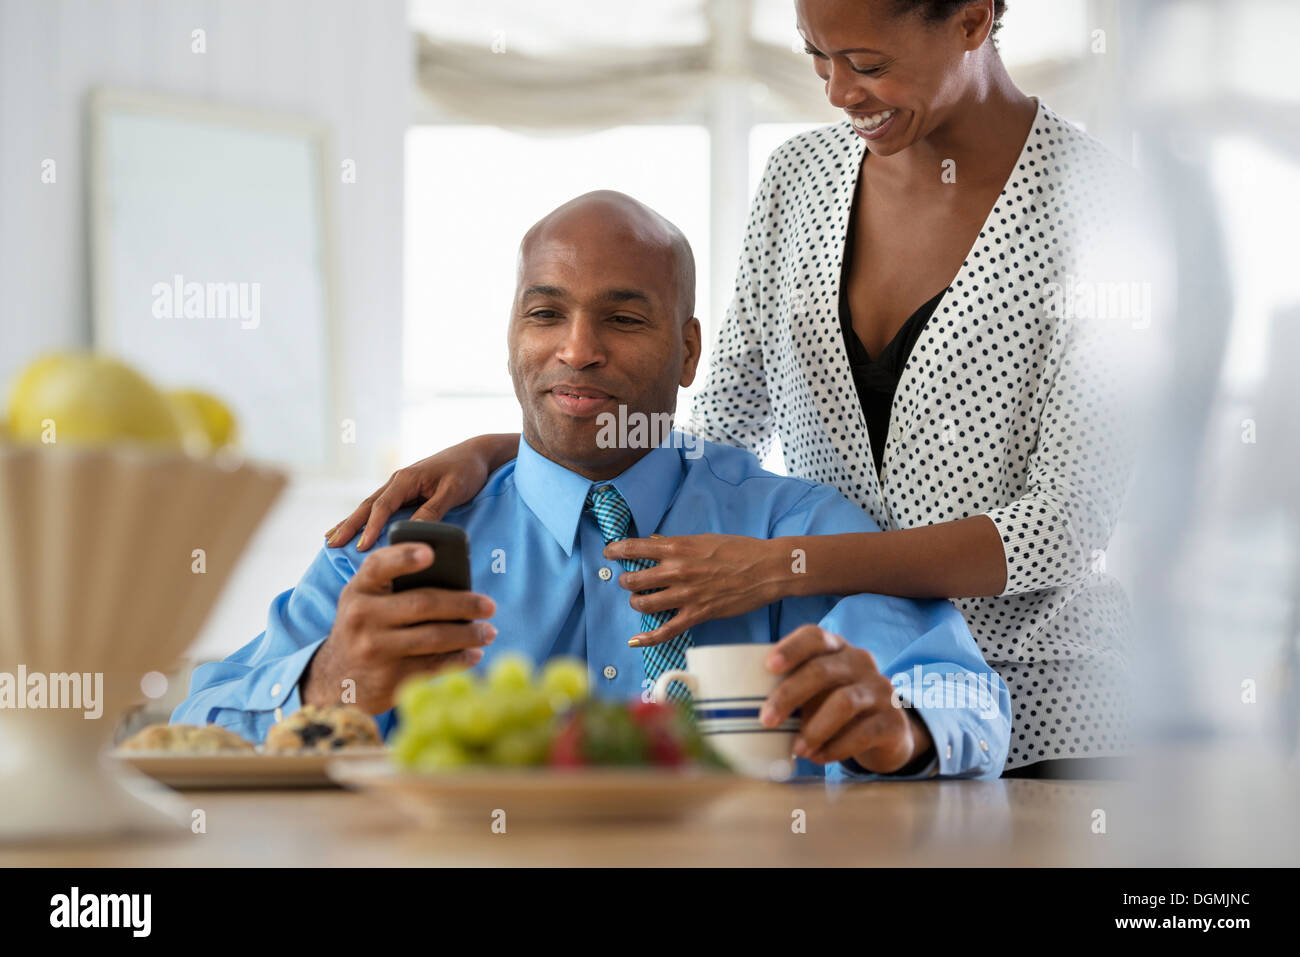 A man in a blue shirt, sitting at a breakfast bar using a smart phone. Stock Photo